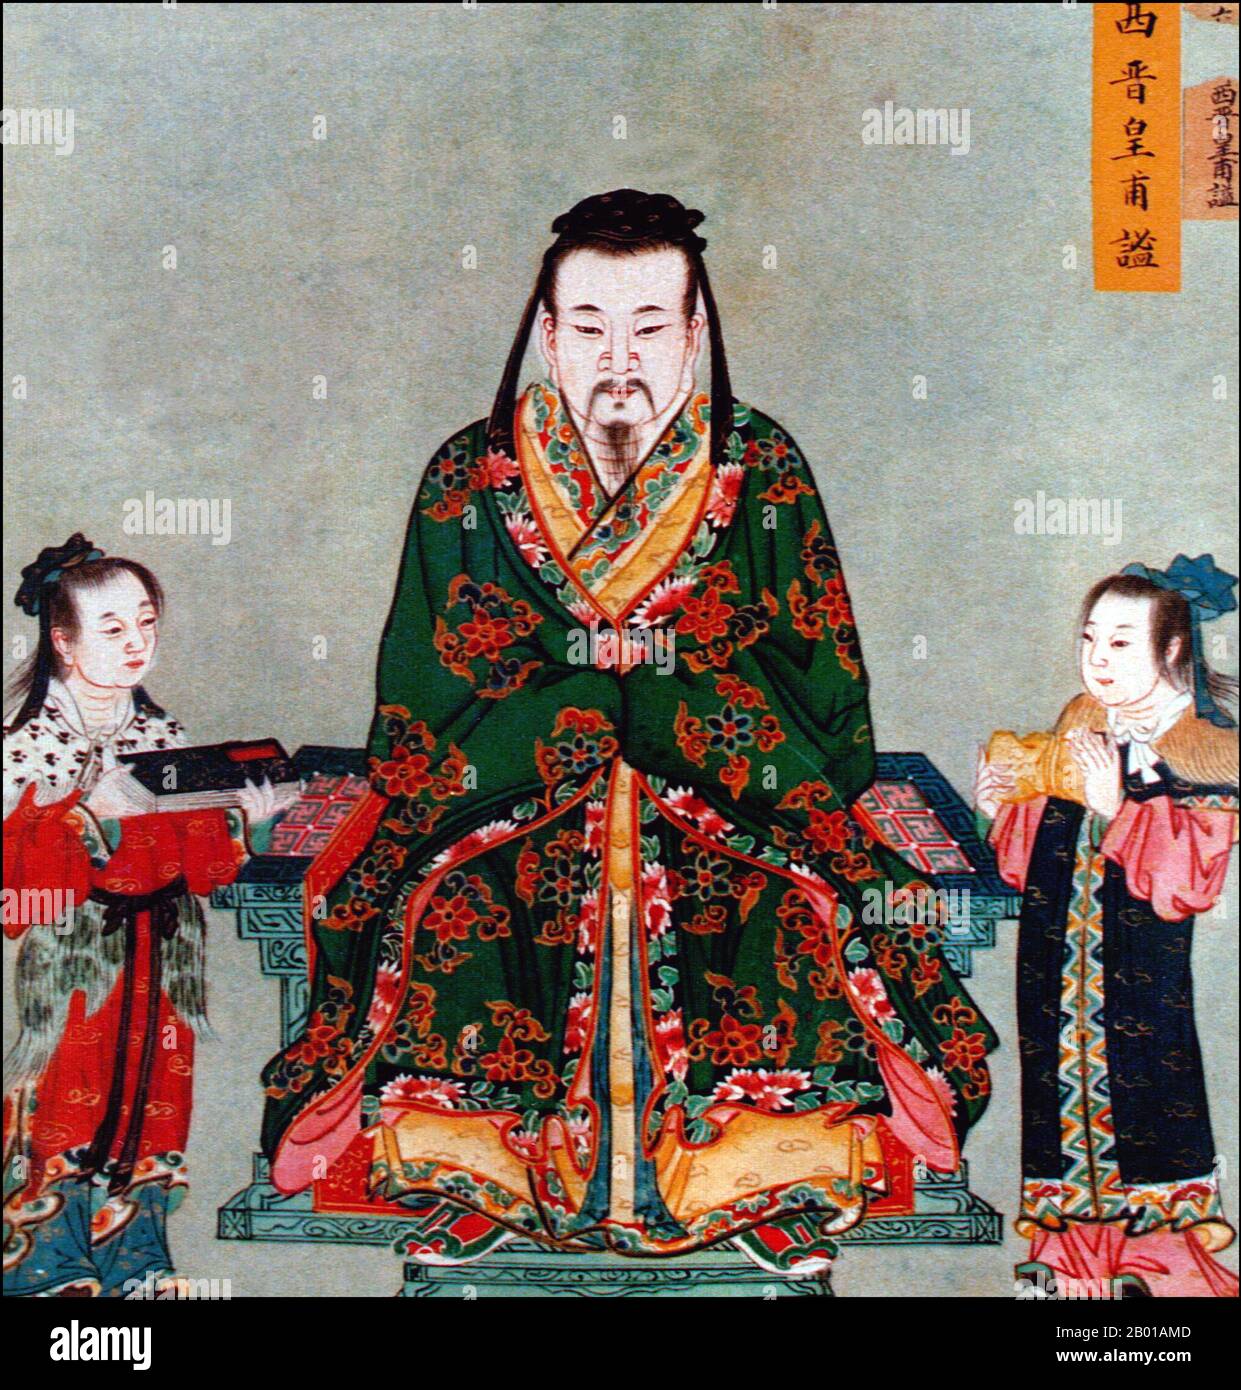 China: Huangfu Mi, scholar and physician during the Late Han Dynasty (215-282 CE).  Huangfu Mi, courtesy name Shi'an, was a Chinese scholar and physician during the late Han Dynasty, Three Kingdoms, and Jin Dynasty period of Chinese history. He was born into a poor farming family in present-day Gansu province. Between 256 and 260, toward the end of the state of Cao Wei, he compiled the 'Canon of Acupuncture and Moxibustion' (Pinyin: Zhēnjiŭ jiăyĭ jīng; Wade–Giles: Chen-chiu chia-i ching), a collection of various texts on acupuncture written in earlier periods. Stock Photo